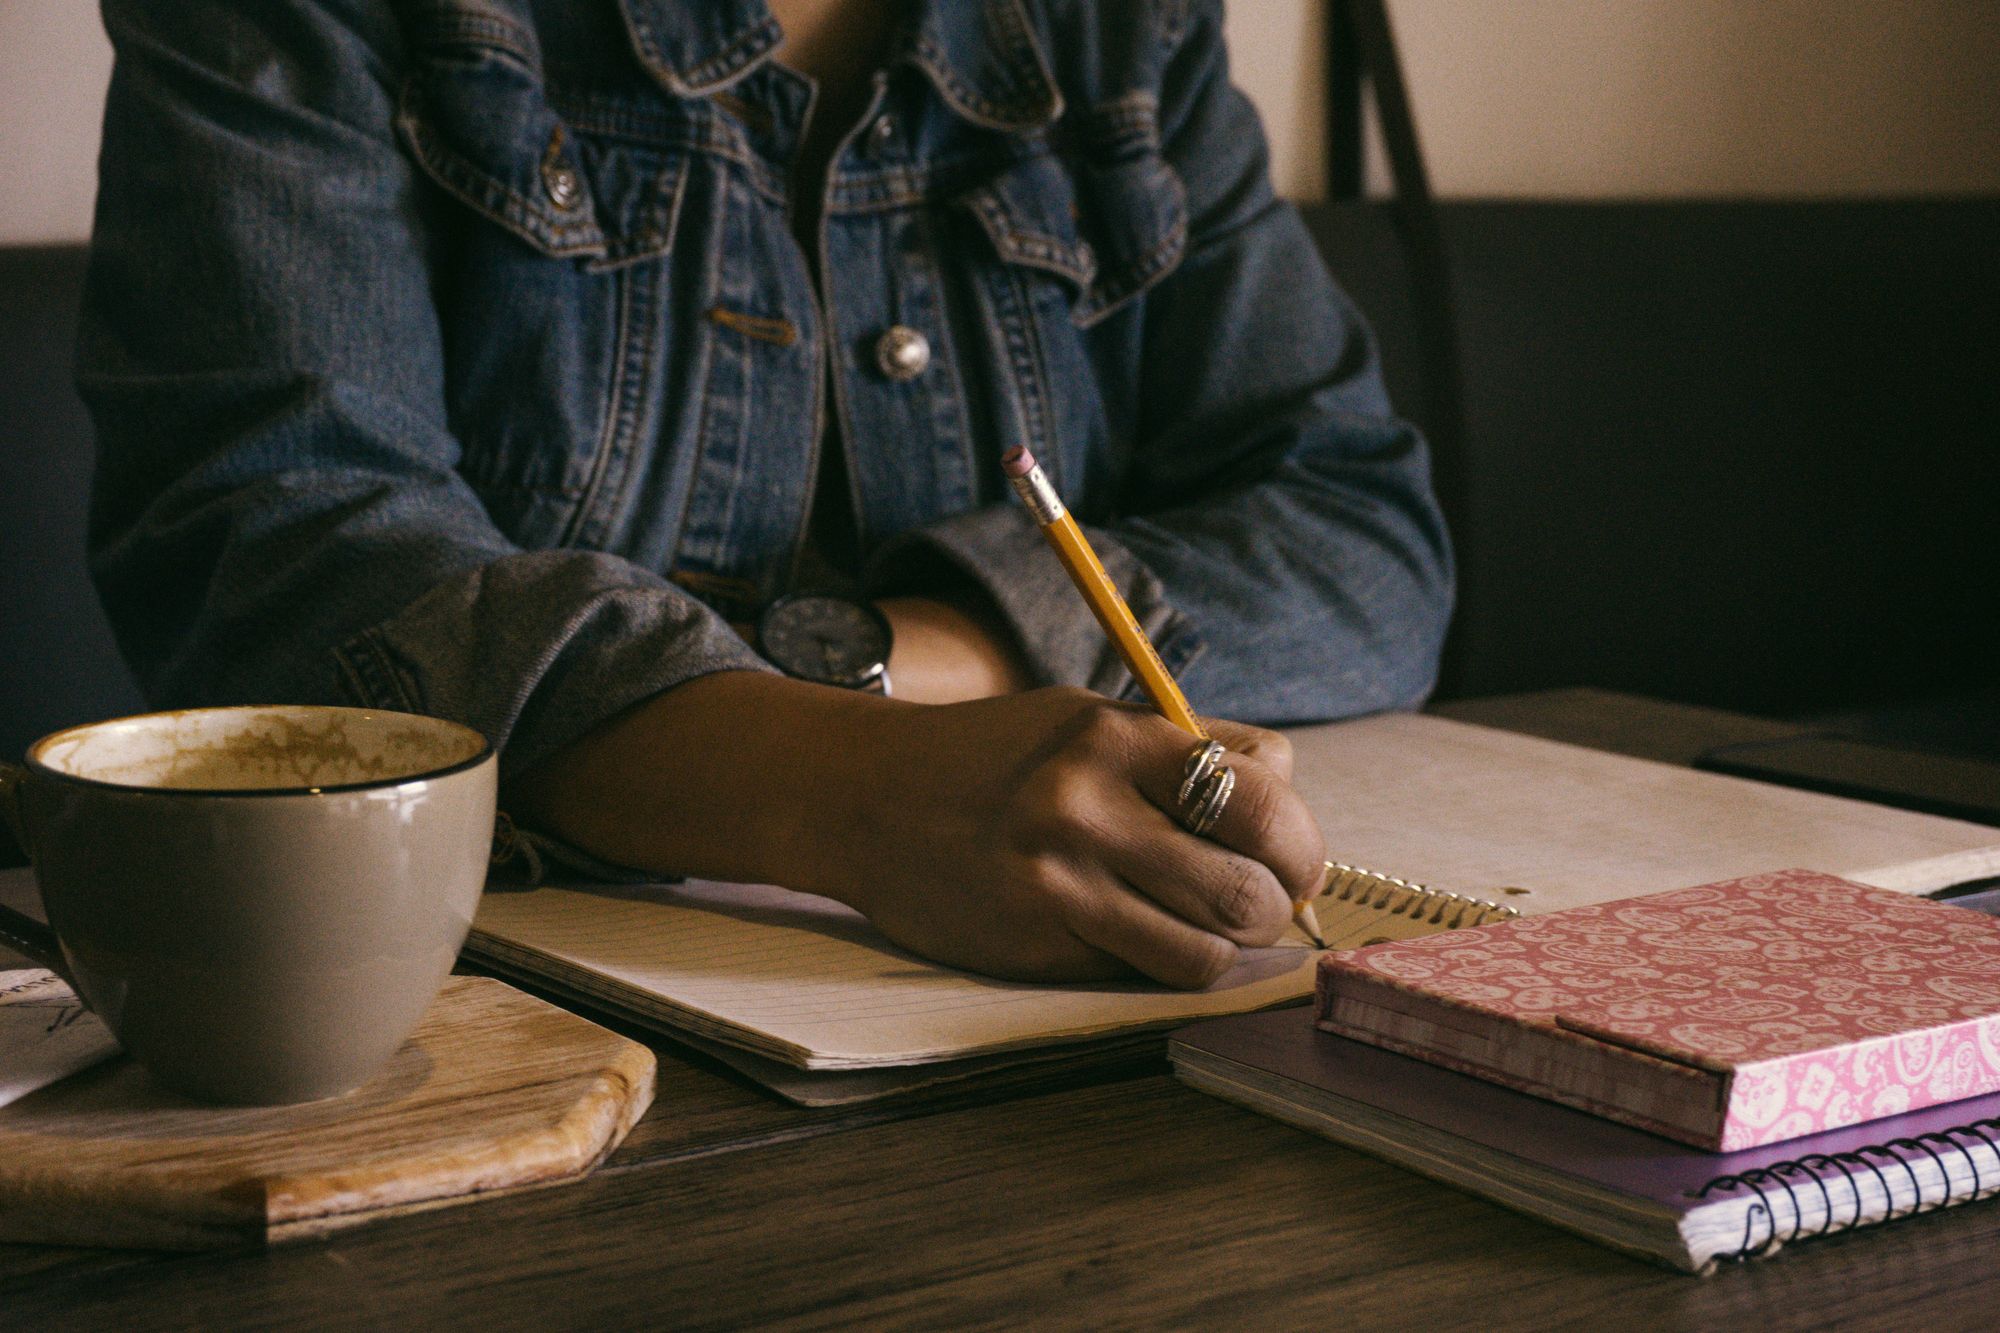 3 Tips How to Write Better Even As A Non-Writer